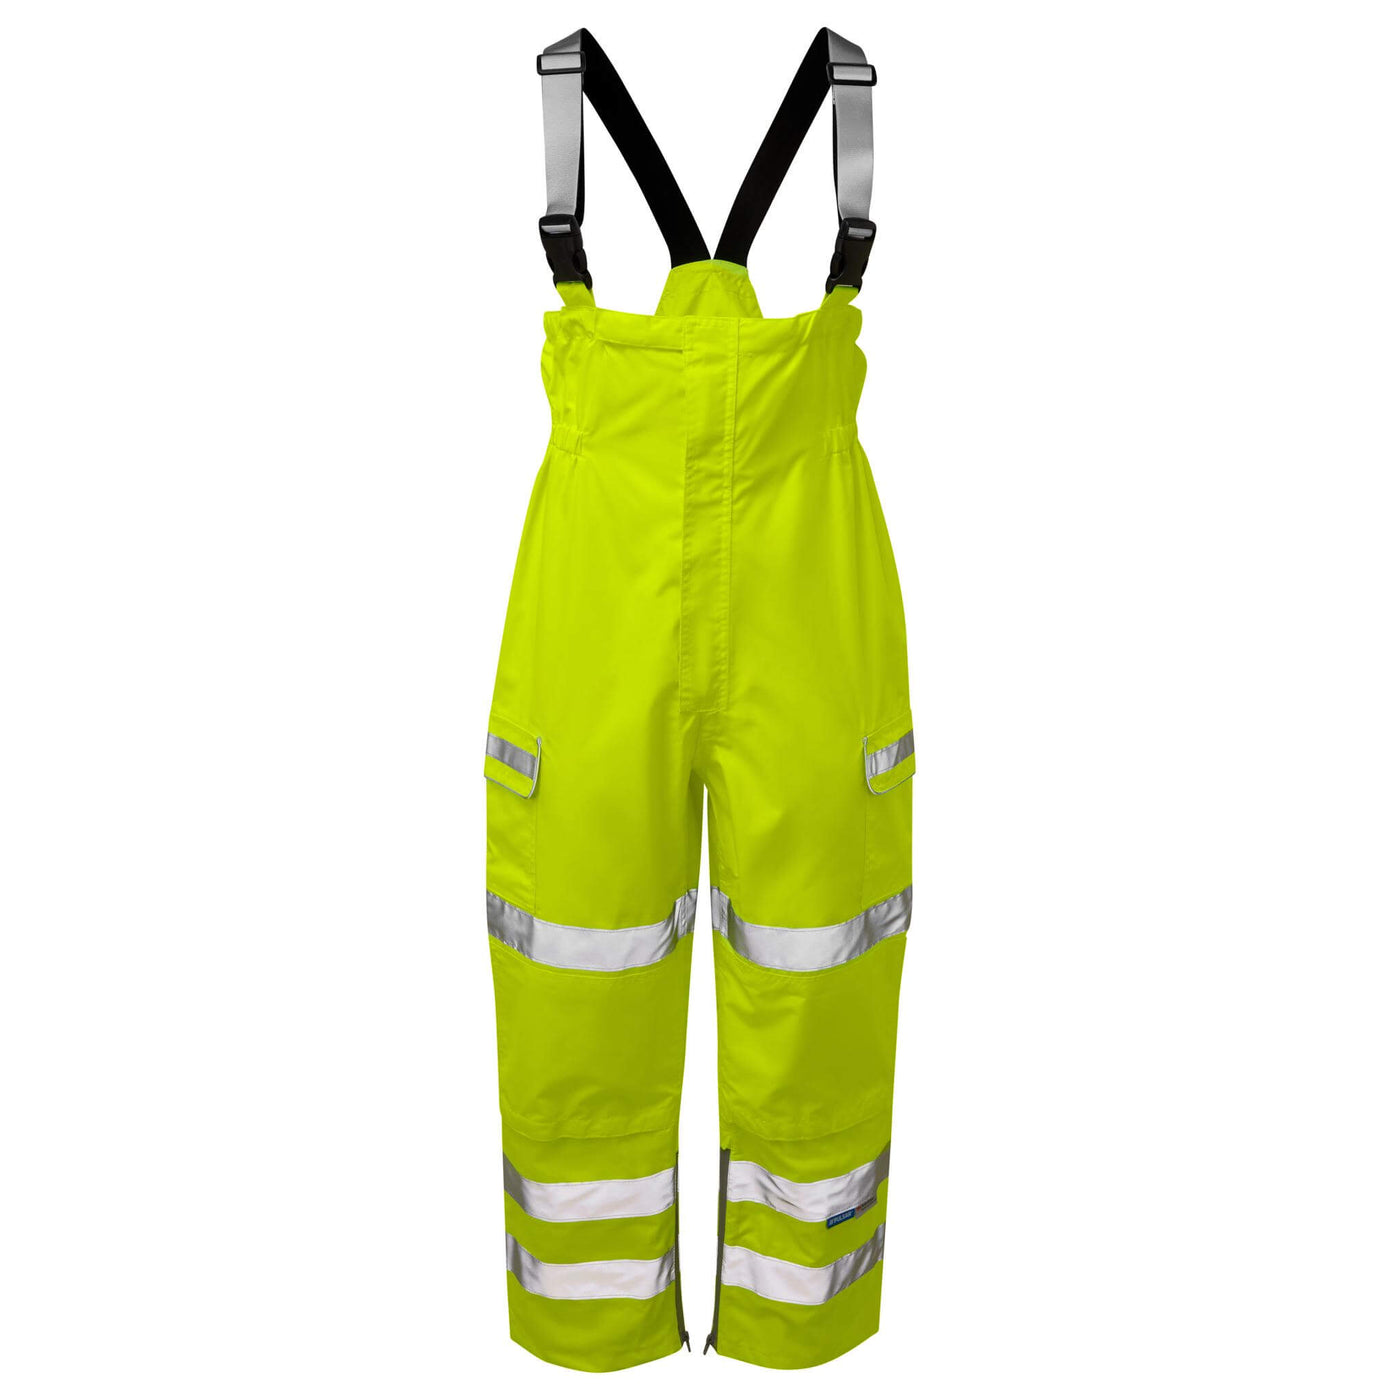 PULSAR P521 Foul Weather Bib and Brace Trousers Yellow Front.jpg #colour_yellow